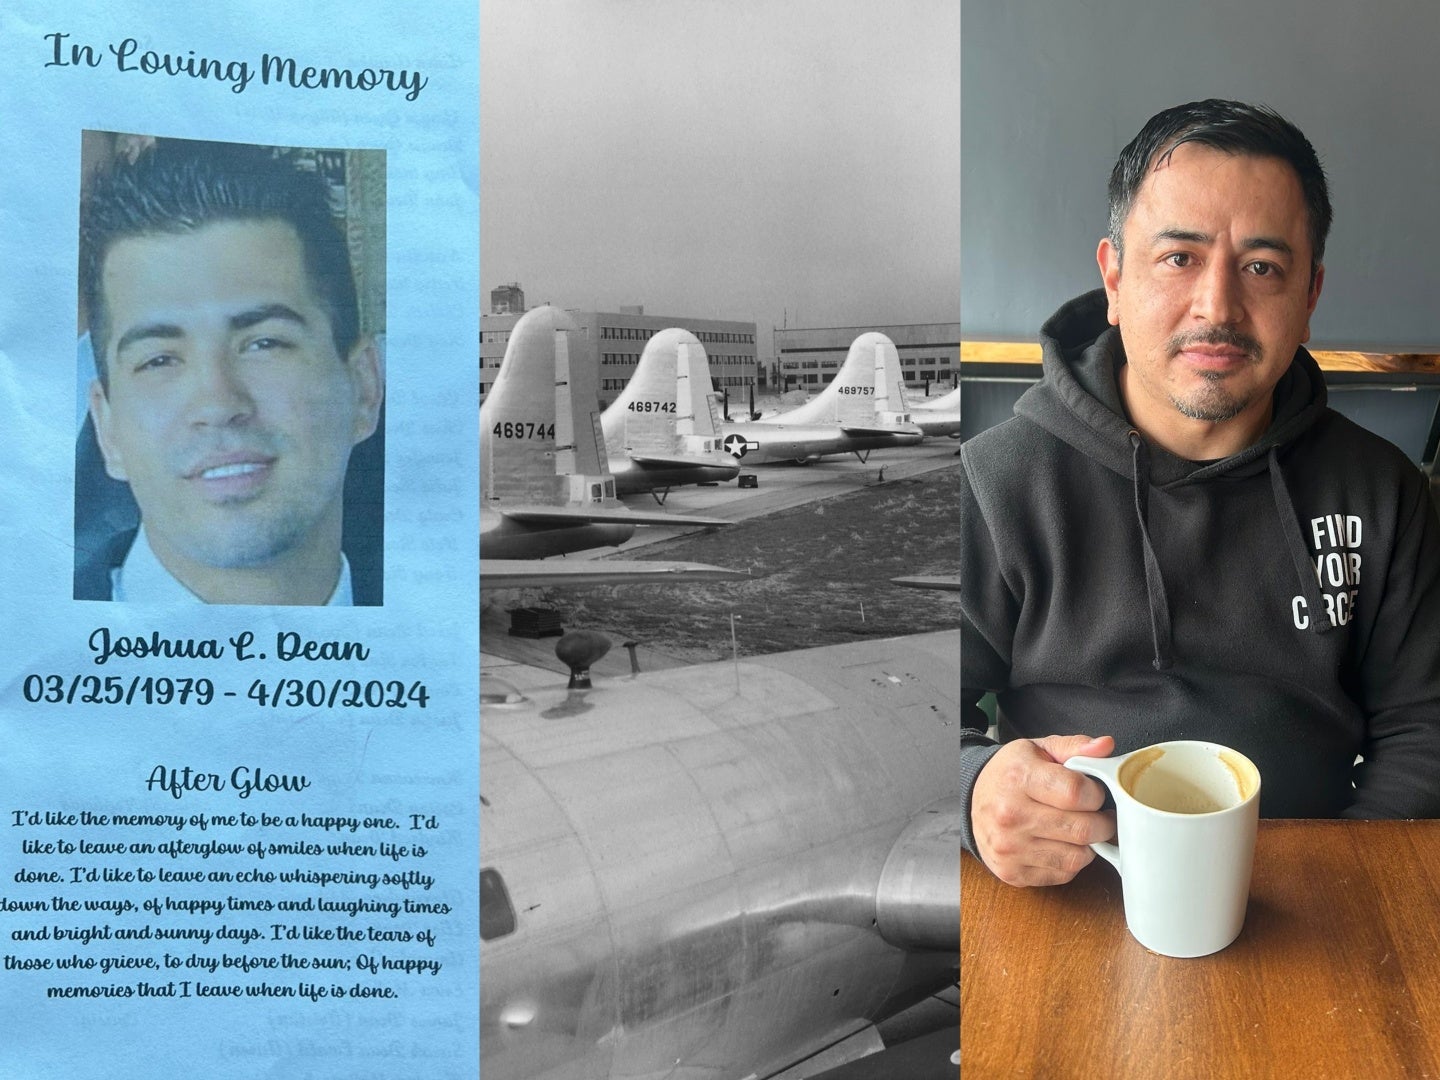 Joshua Dean memorial service on the left, Santiago Paredes on the right